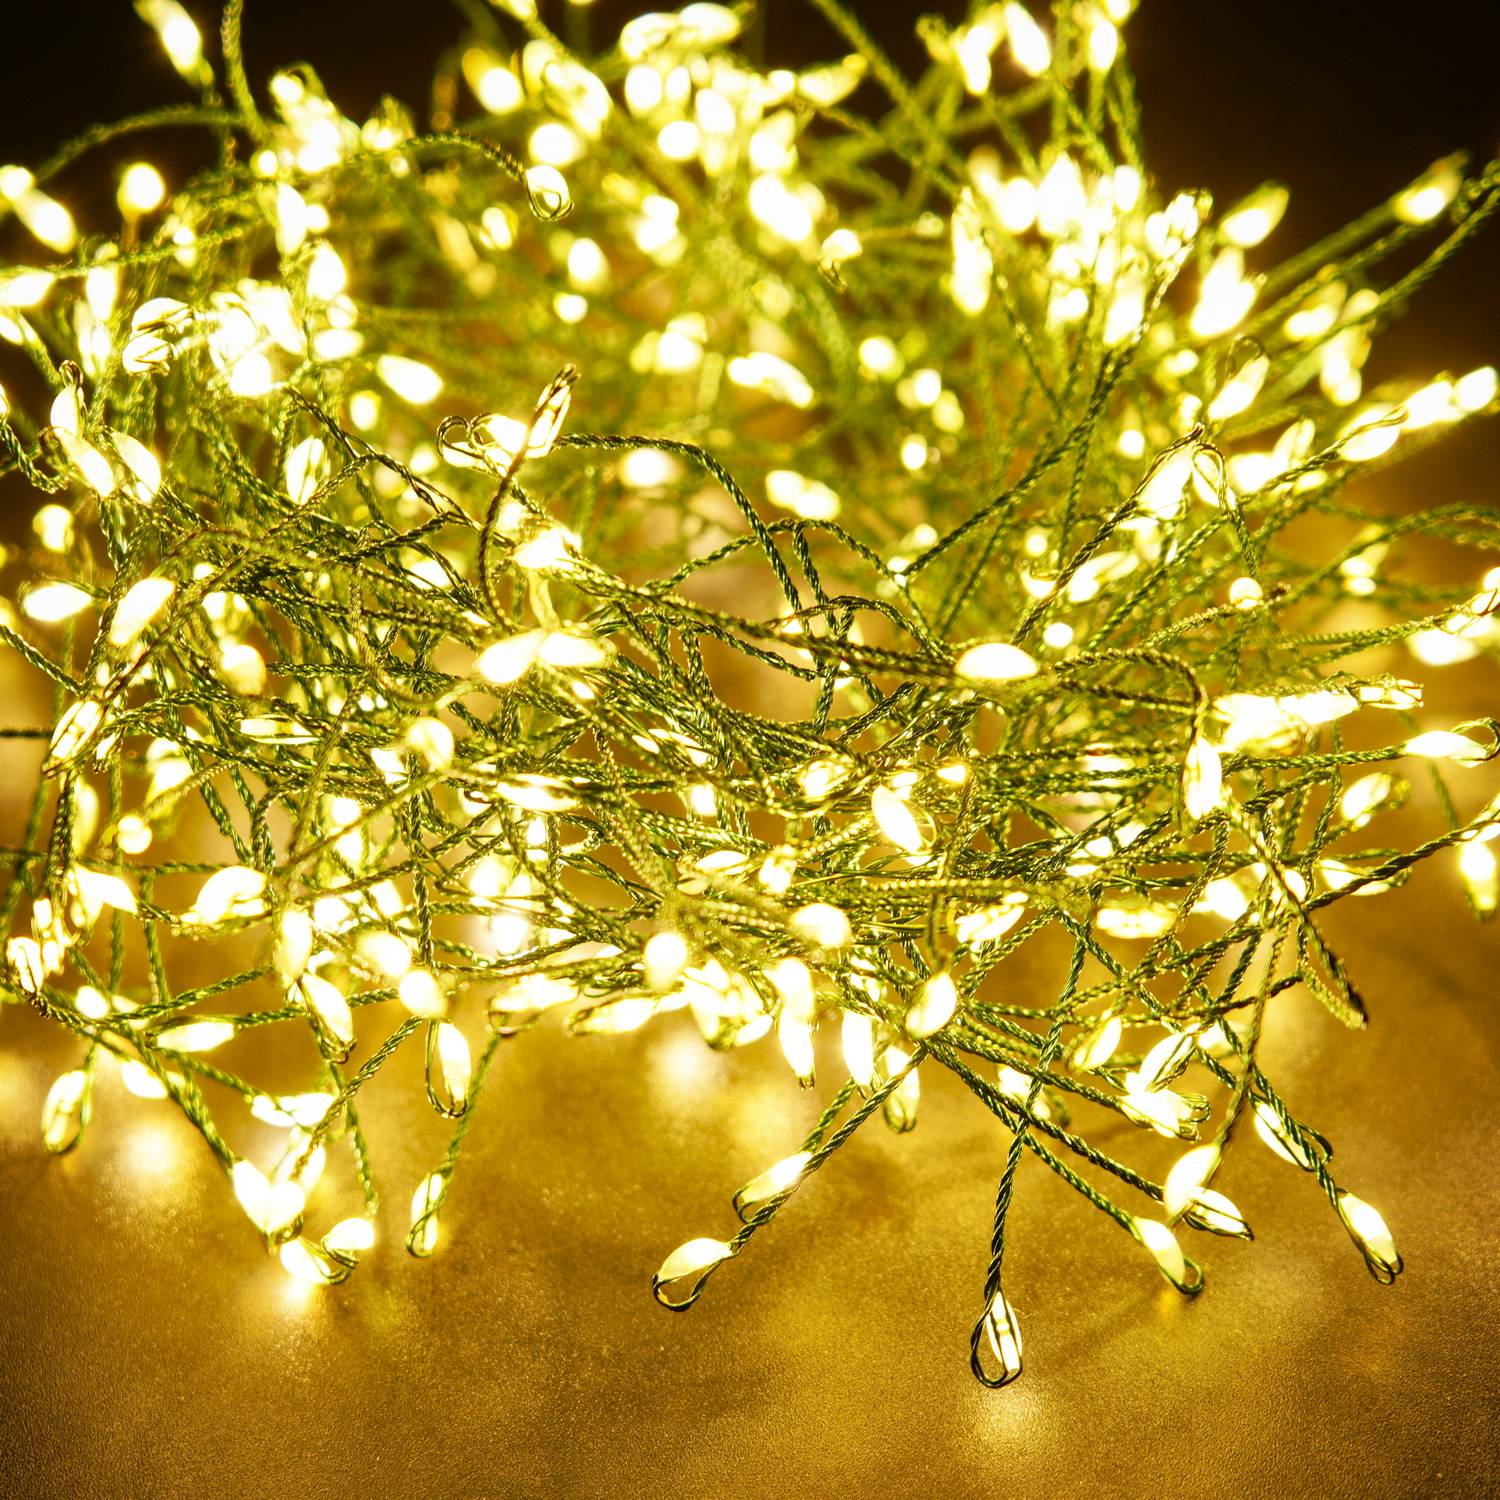 Outdoor Patio Garden Waterproof Led Cluster String Lights For Christmas Holiday Decorative Lighting